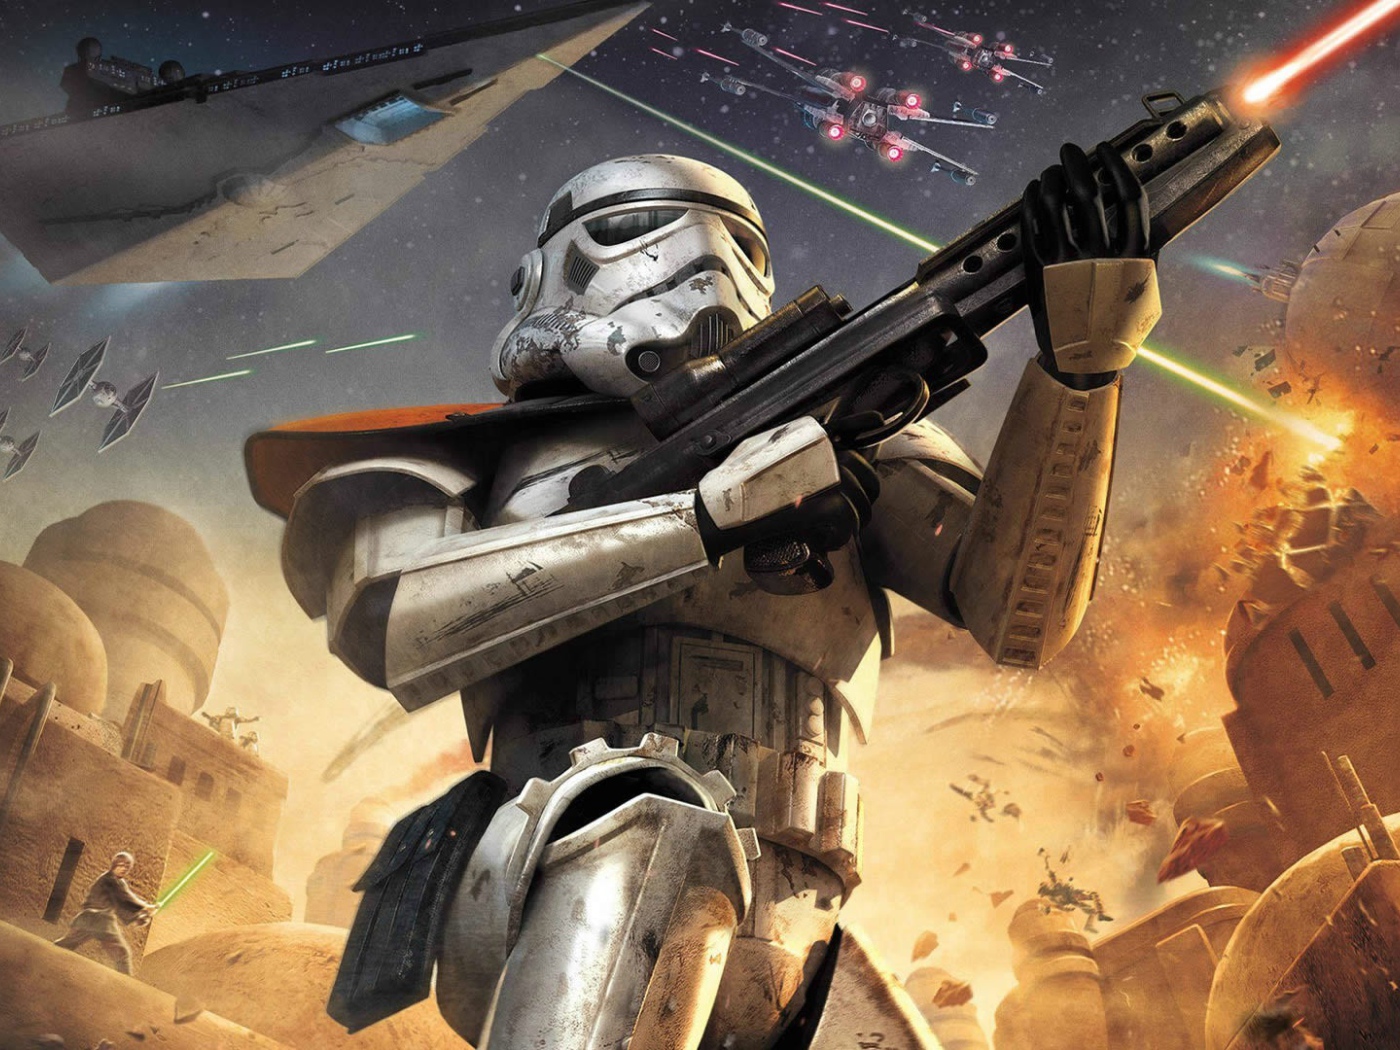 The battle on a distant planet in the game Star Wars Battlefront